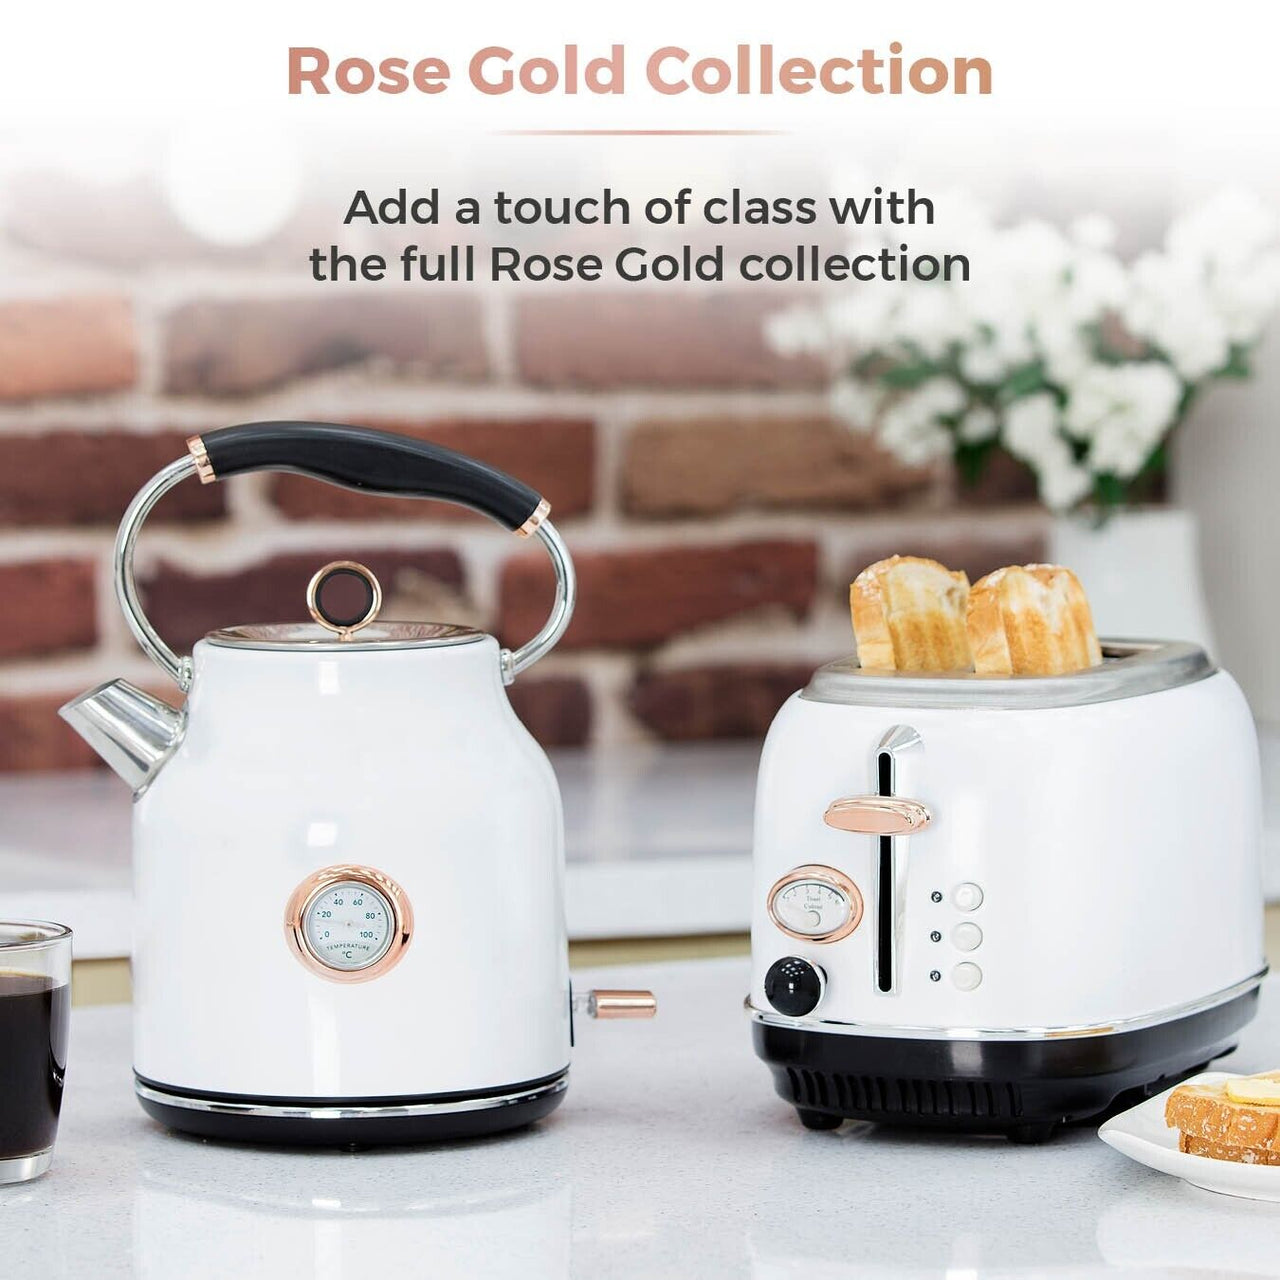 Tower Bottega White & Rose Gold 1.7L 3KW Traditional Kettle, 2 Slice Toaster, T24034WHT 700W 20L Microwave Matching Set